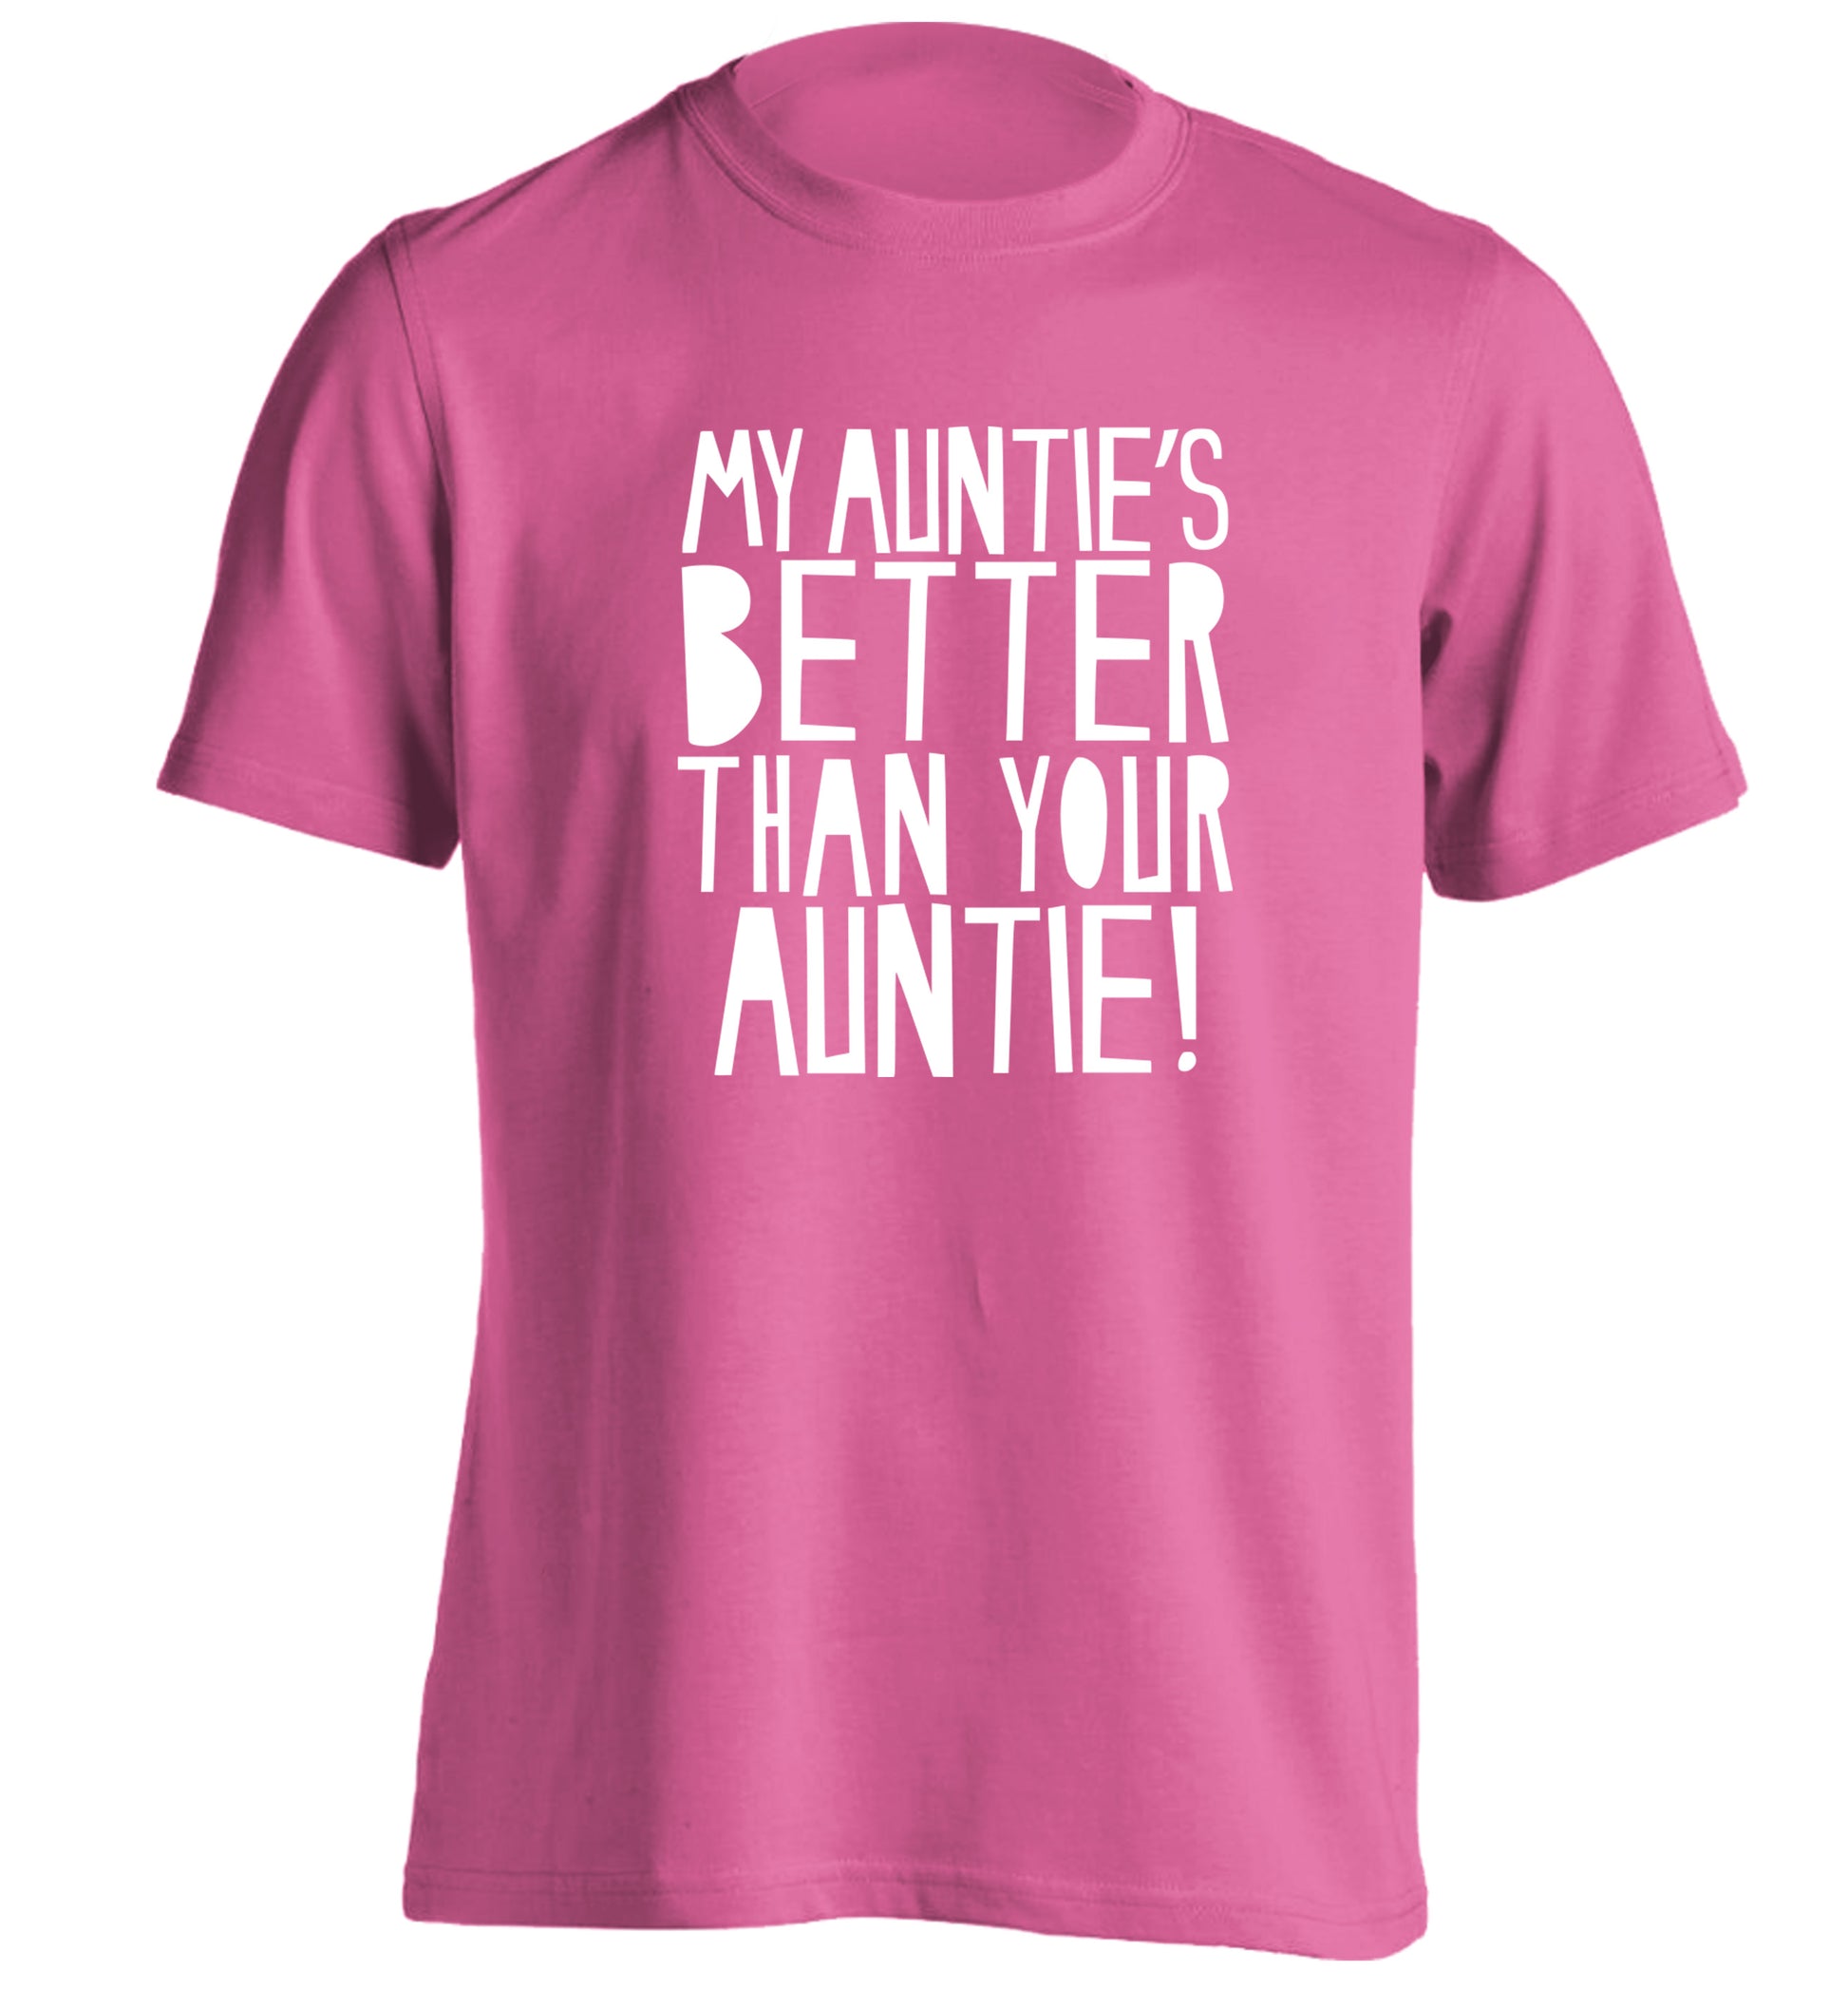 My auntie's better than your auntie adults unisex pink Tshirt 2XL